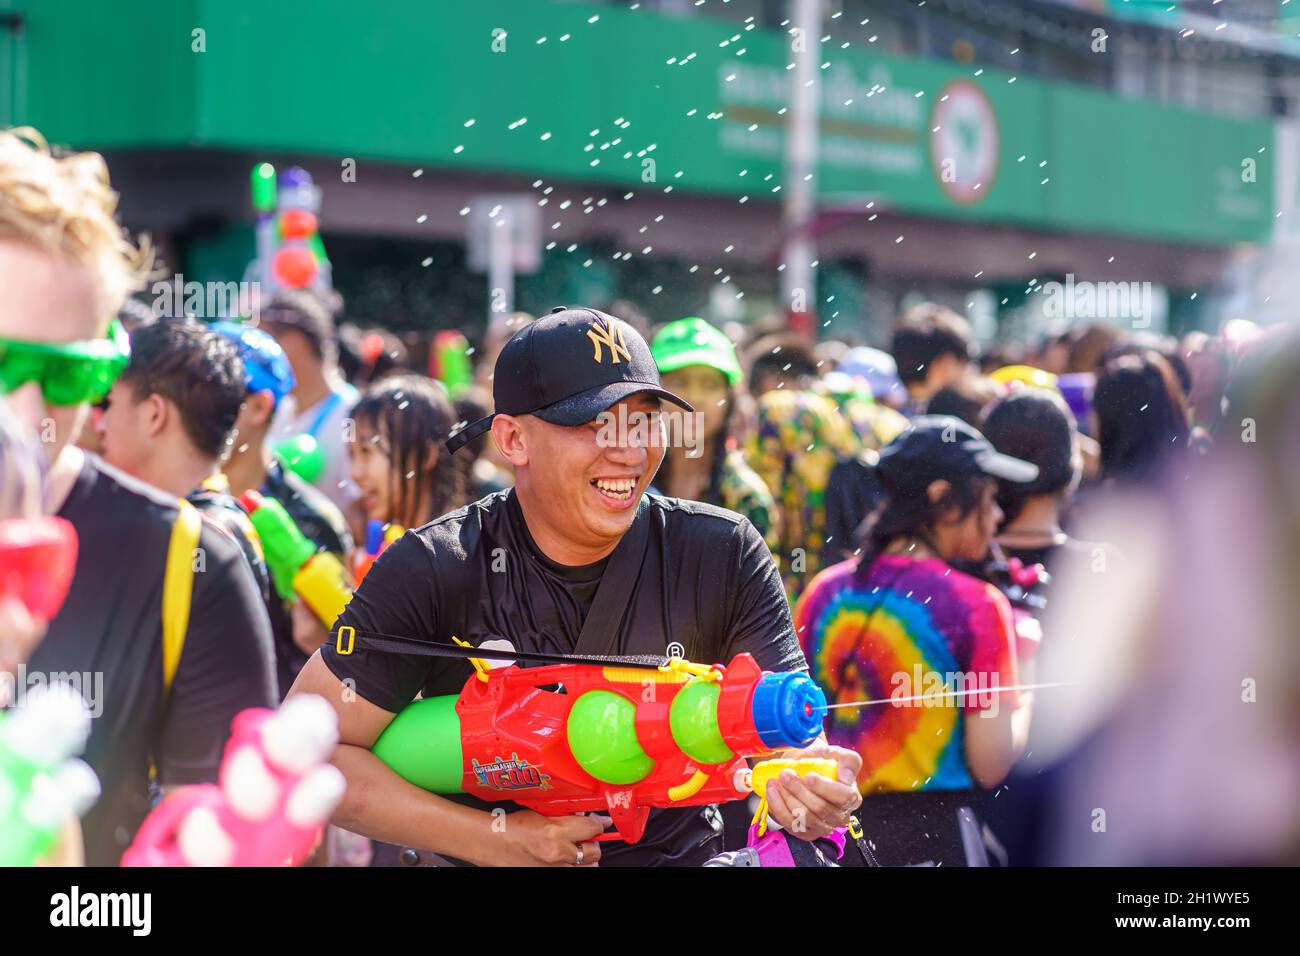 Siam Square, Bangkok, Thailand - APR 13, 2019: short action of people joins celebrations of the Thai New Year or Songkran in Siam Square. Stock Photo